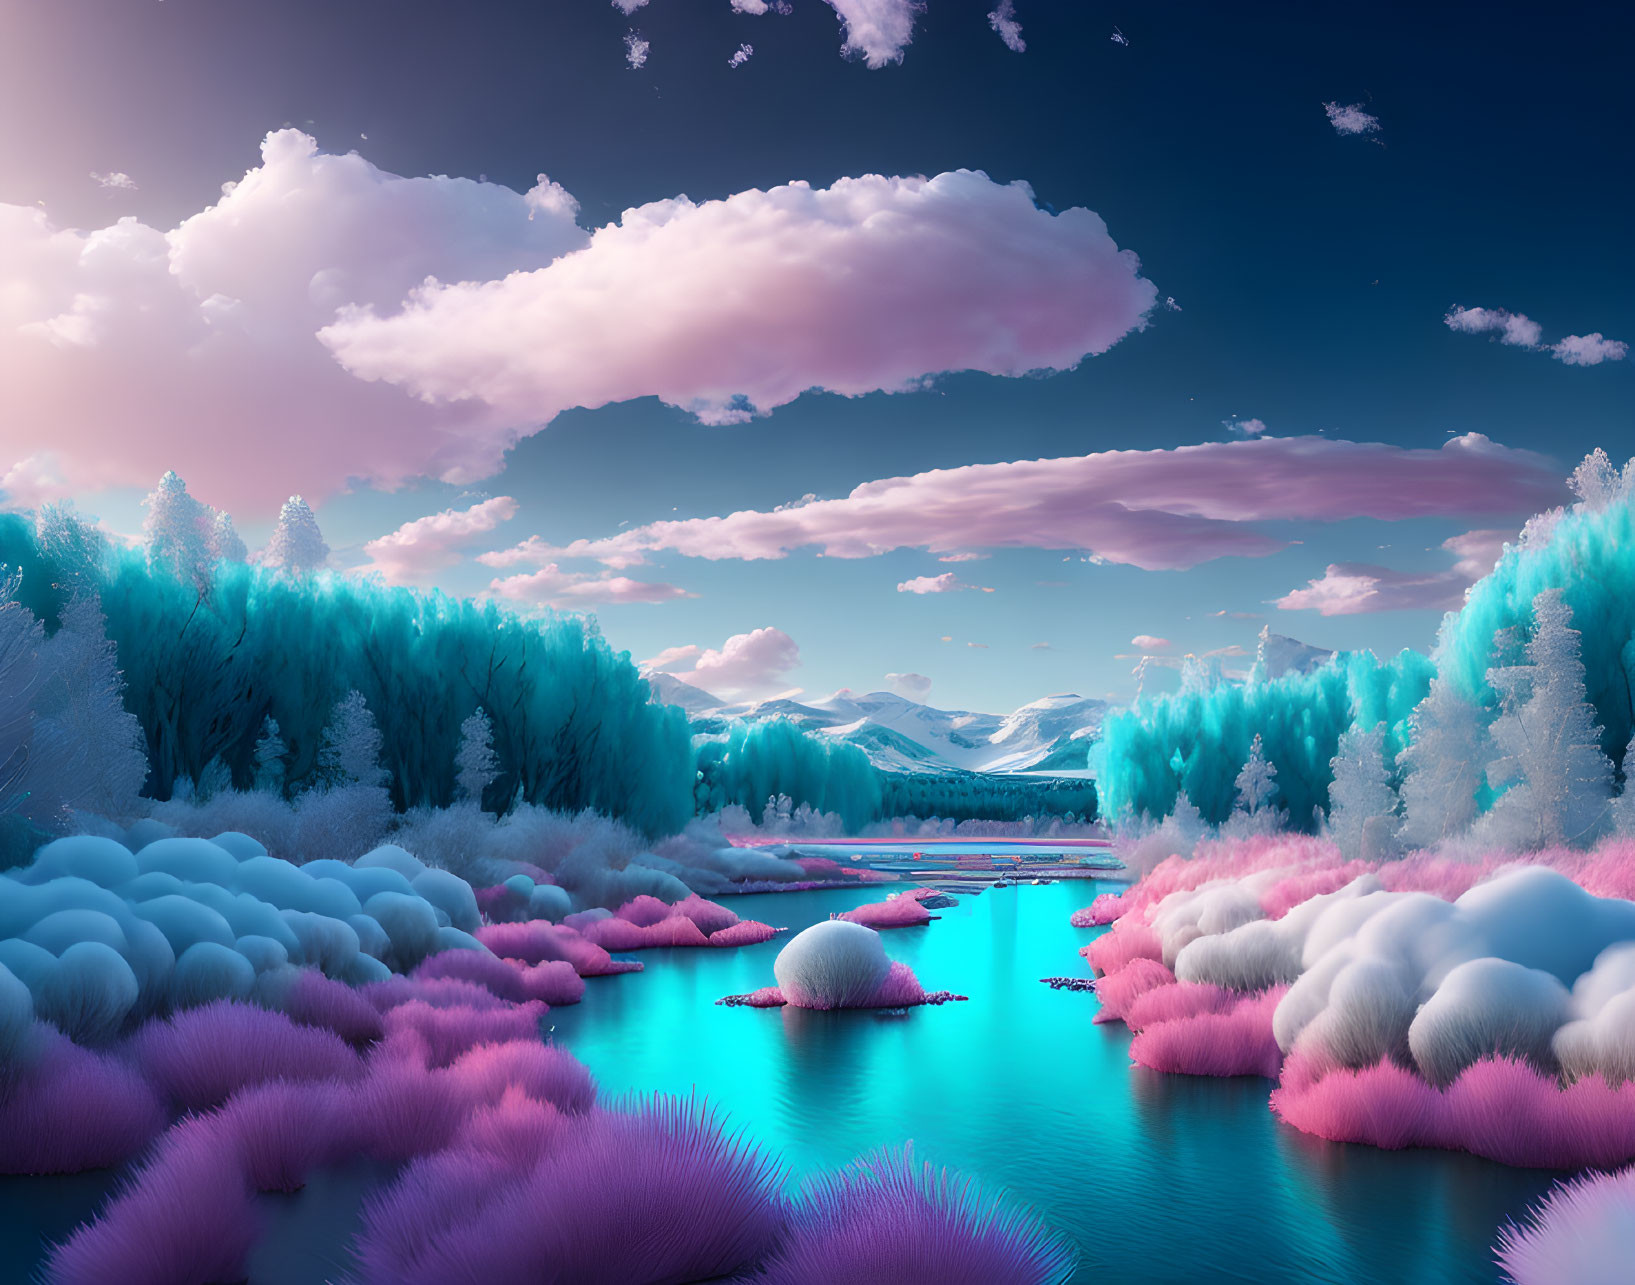 Vibrant landscape with turquoise water, pink clouds, snow-capped mountains, and pink grass